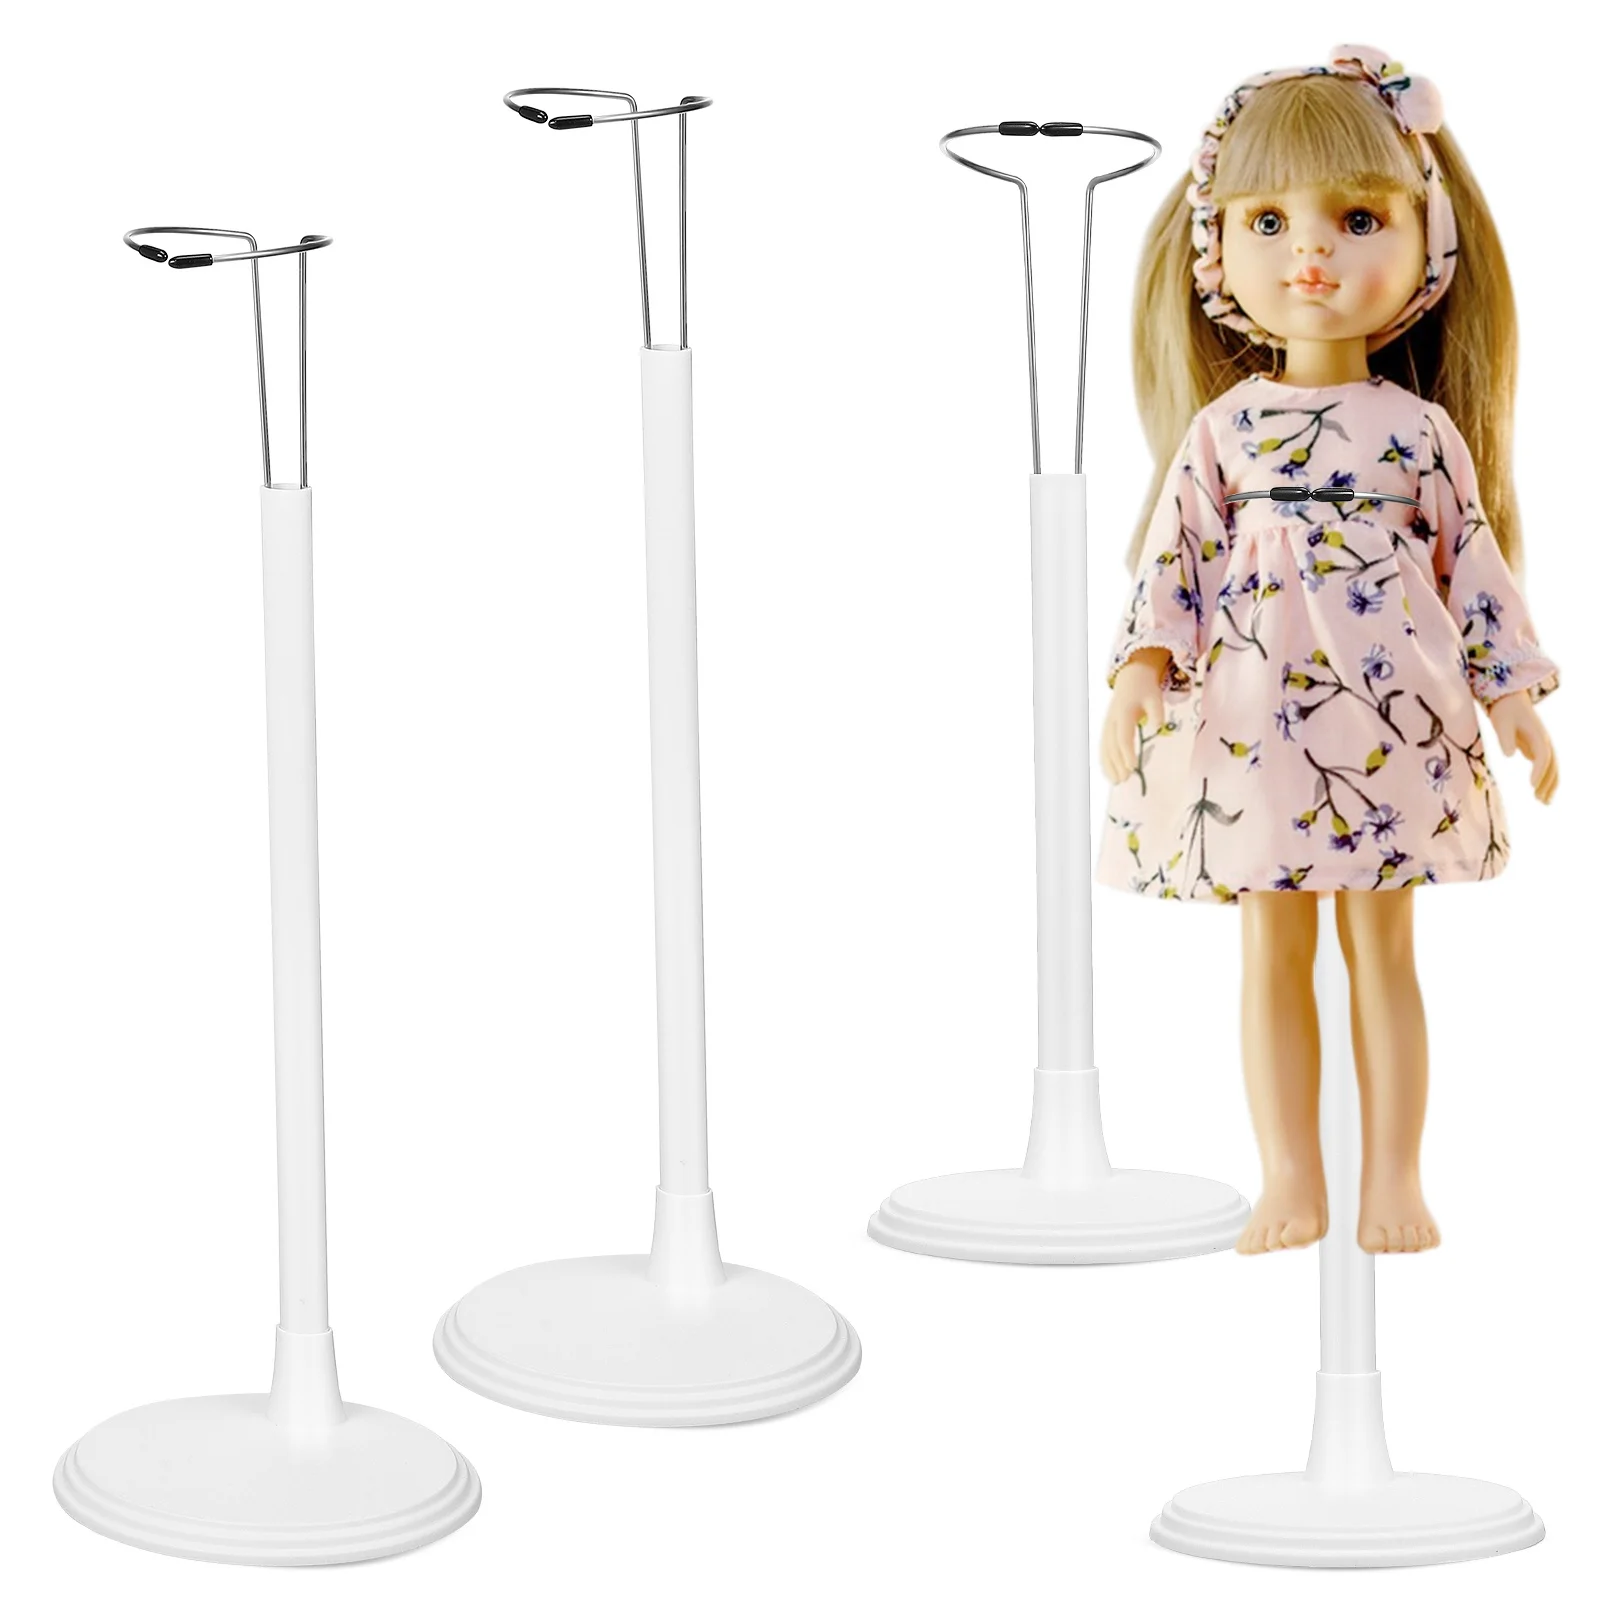 

Doll Stands Doll Display Support Action Figure Stands Vertical Children Toys Accessories for Dolls Model Display Stand